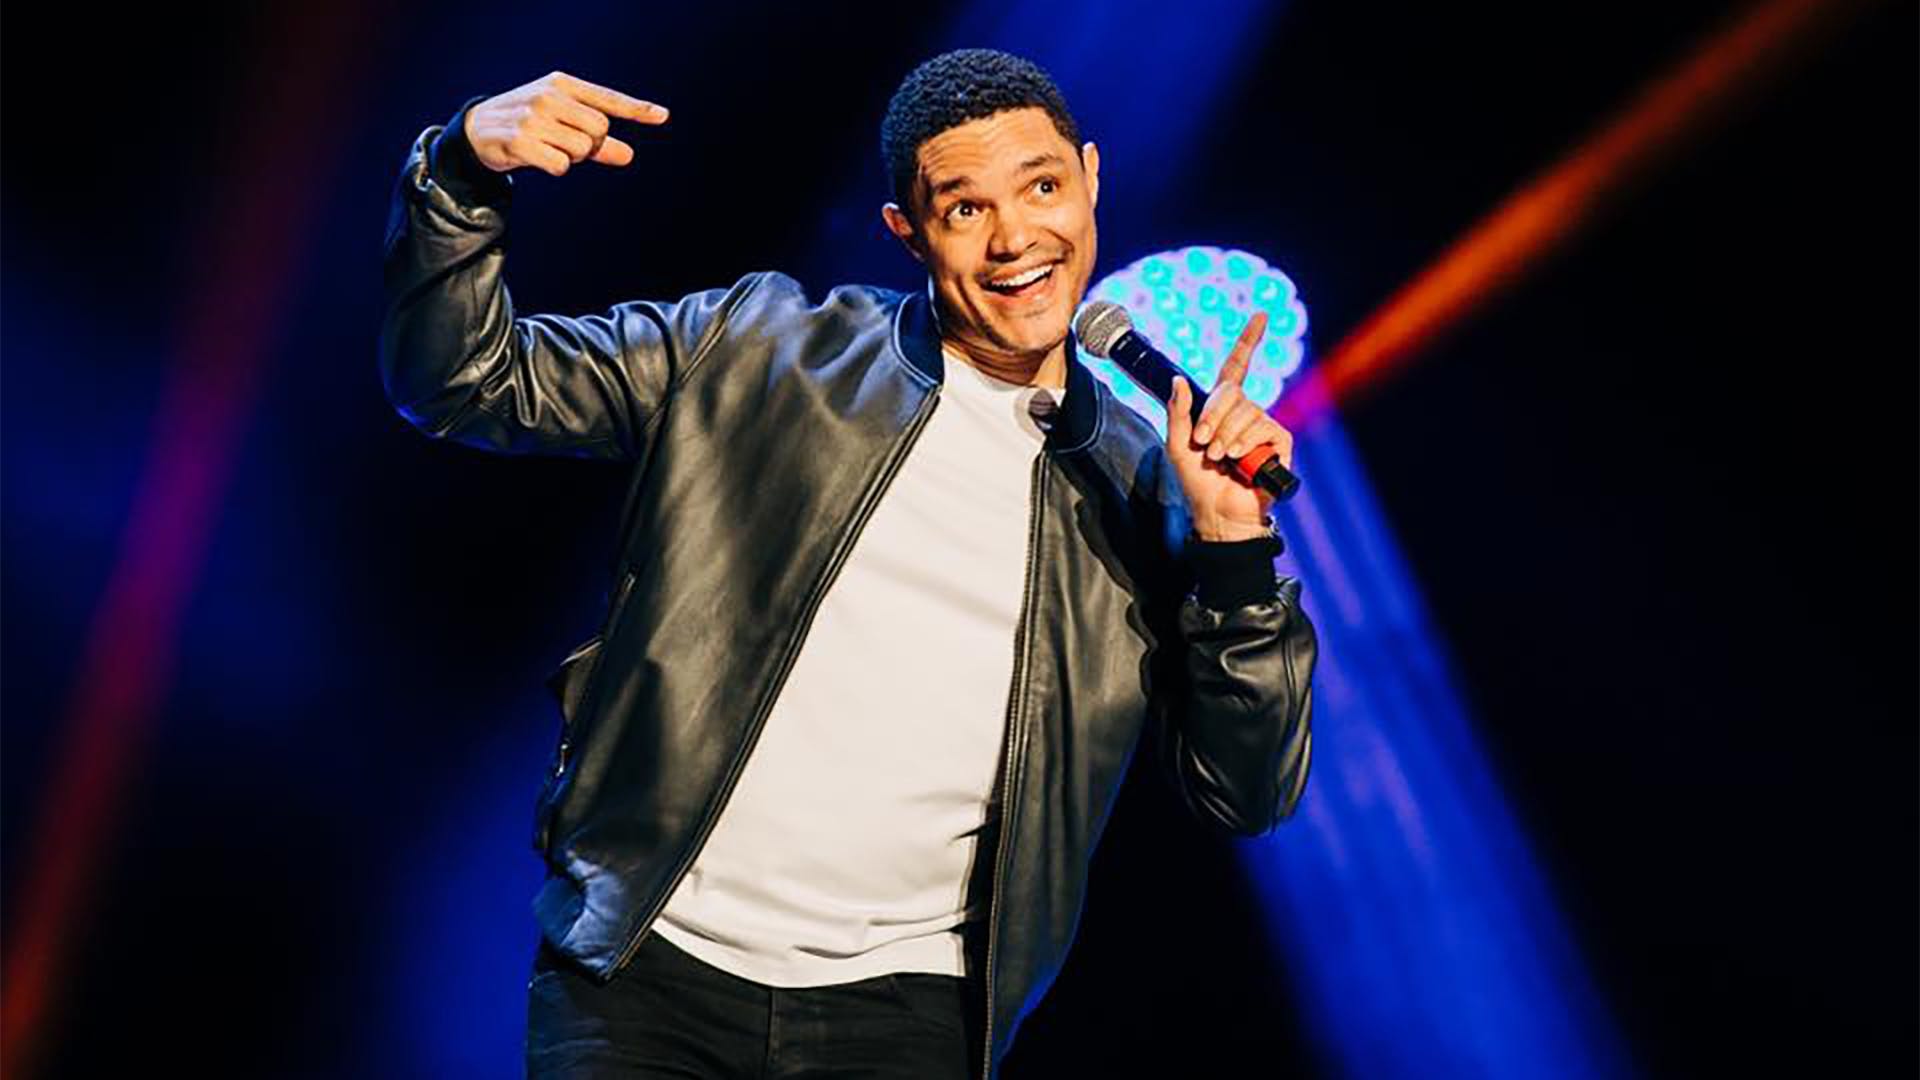 Trevor Noah Loud And Clear Tour In India Date, Venue And Schedule